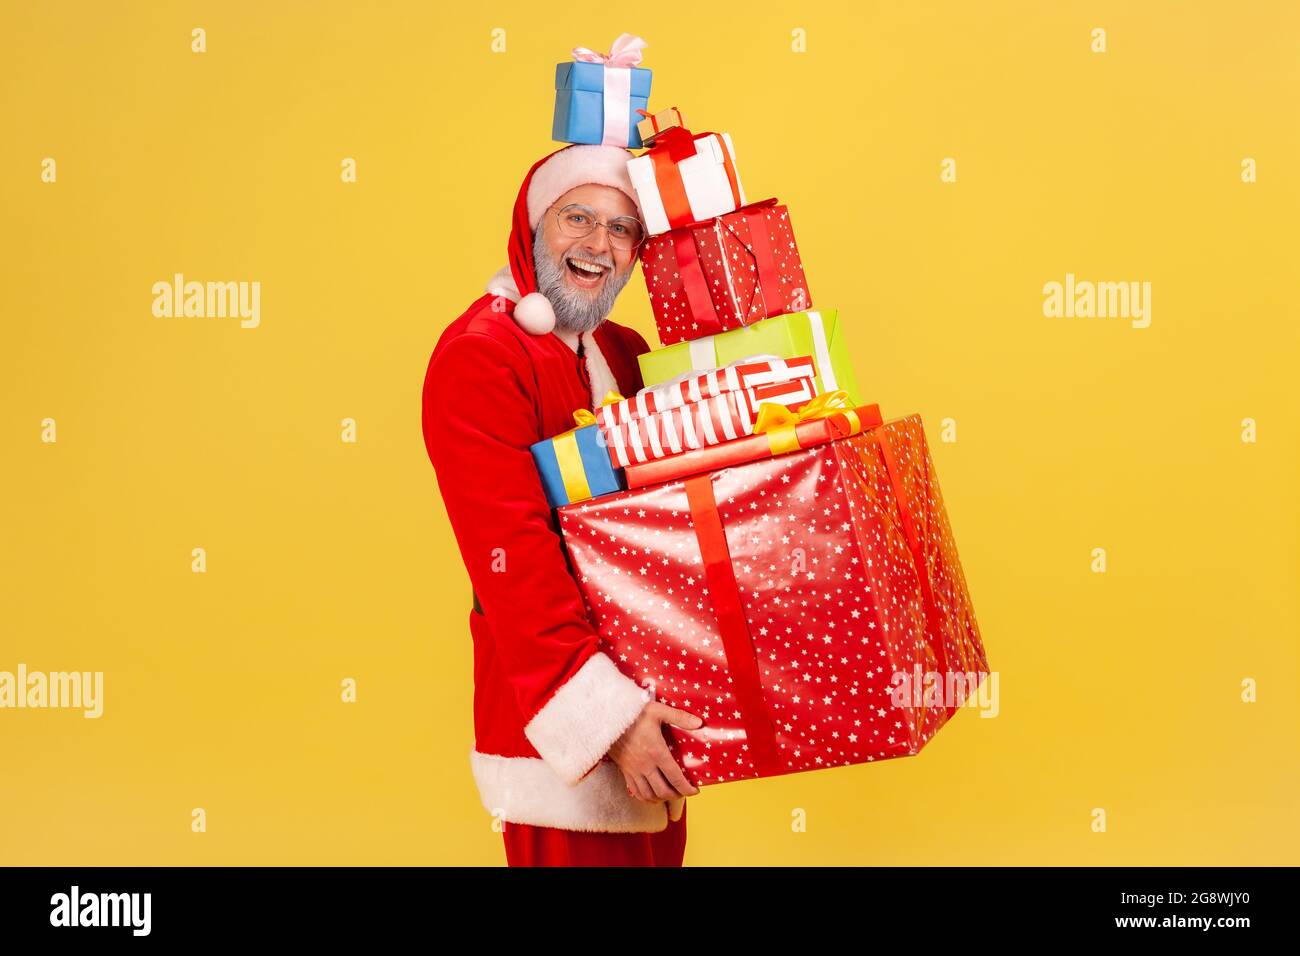 Happy funny elderly man with gray beard in santa claus costume holding stack of Christmas presents in hands and on head, celebrating with new year. In Stock Photo